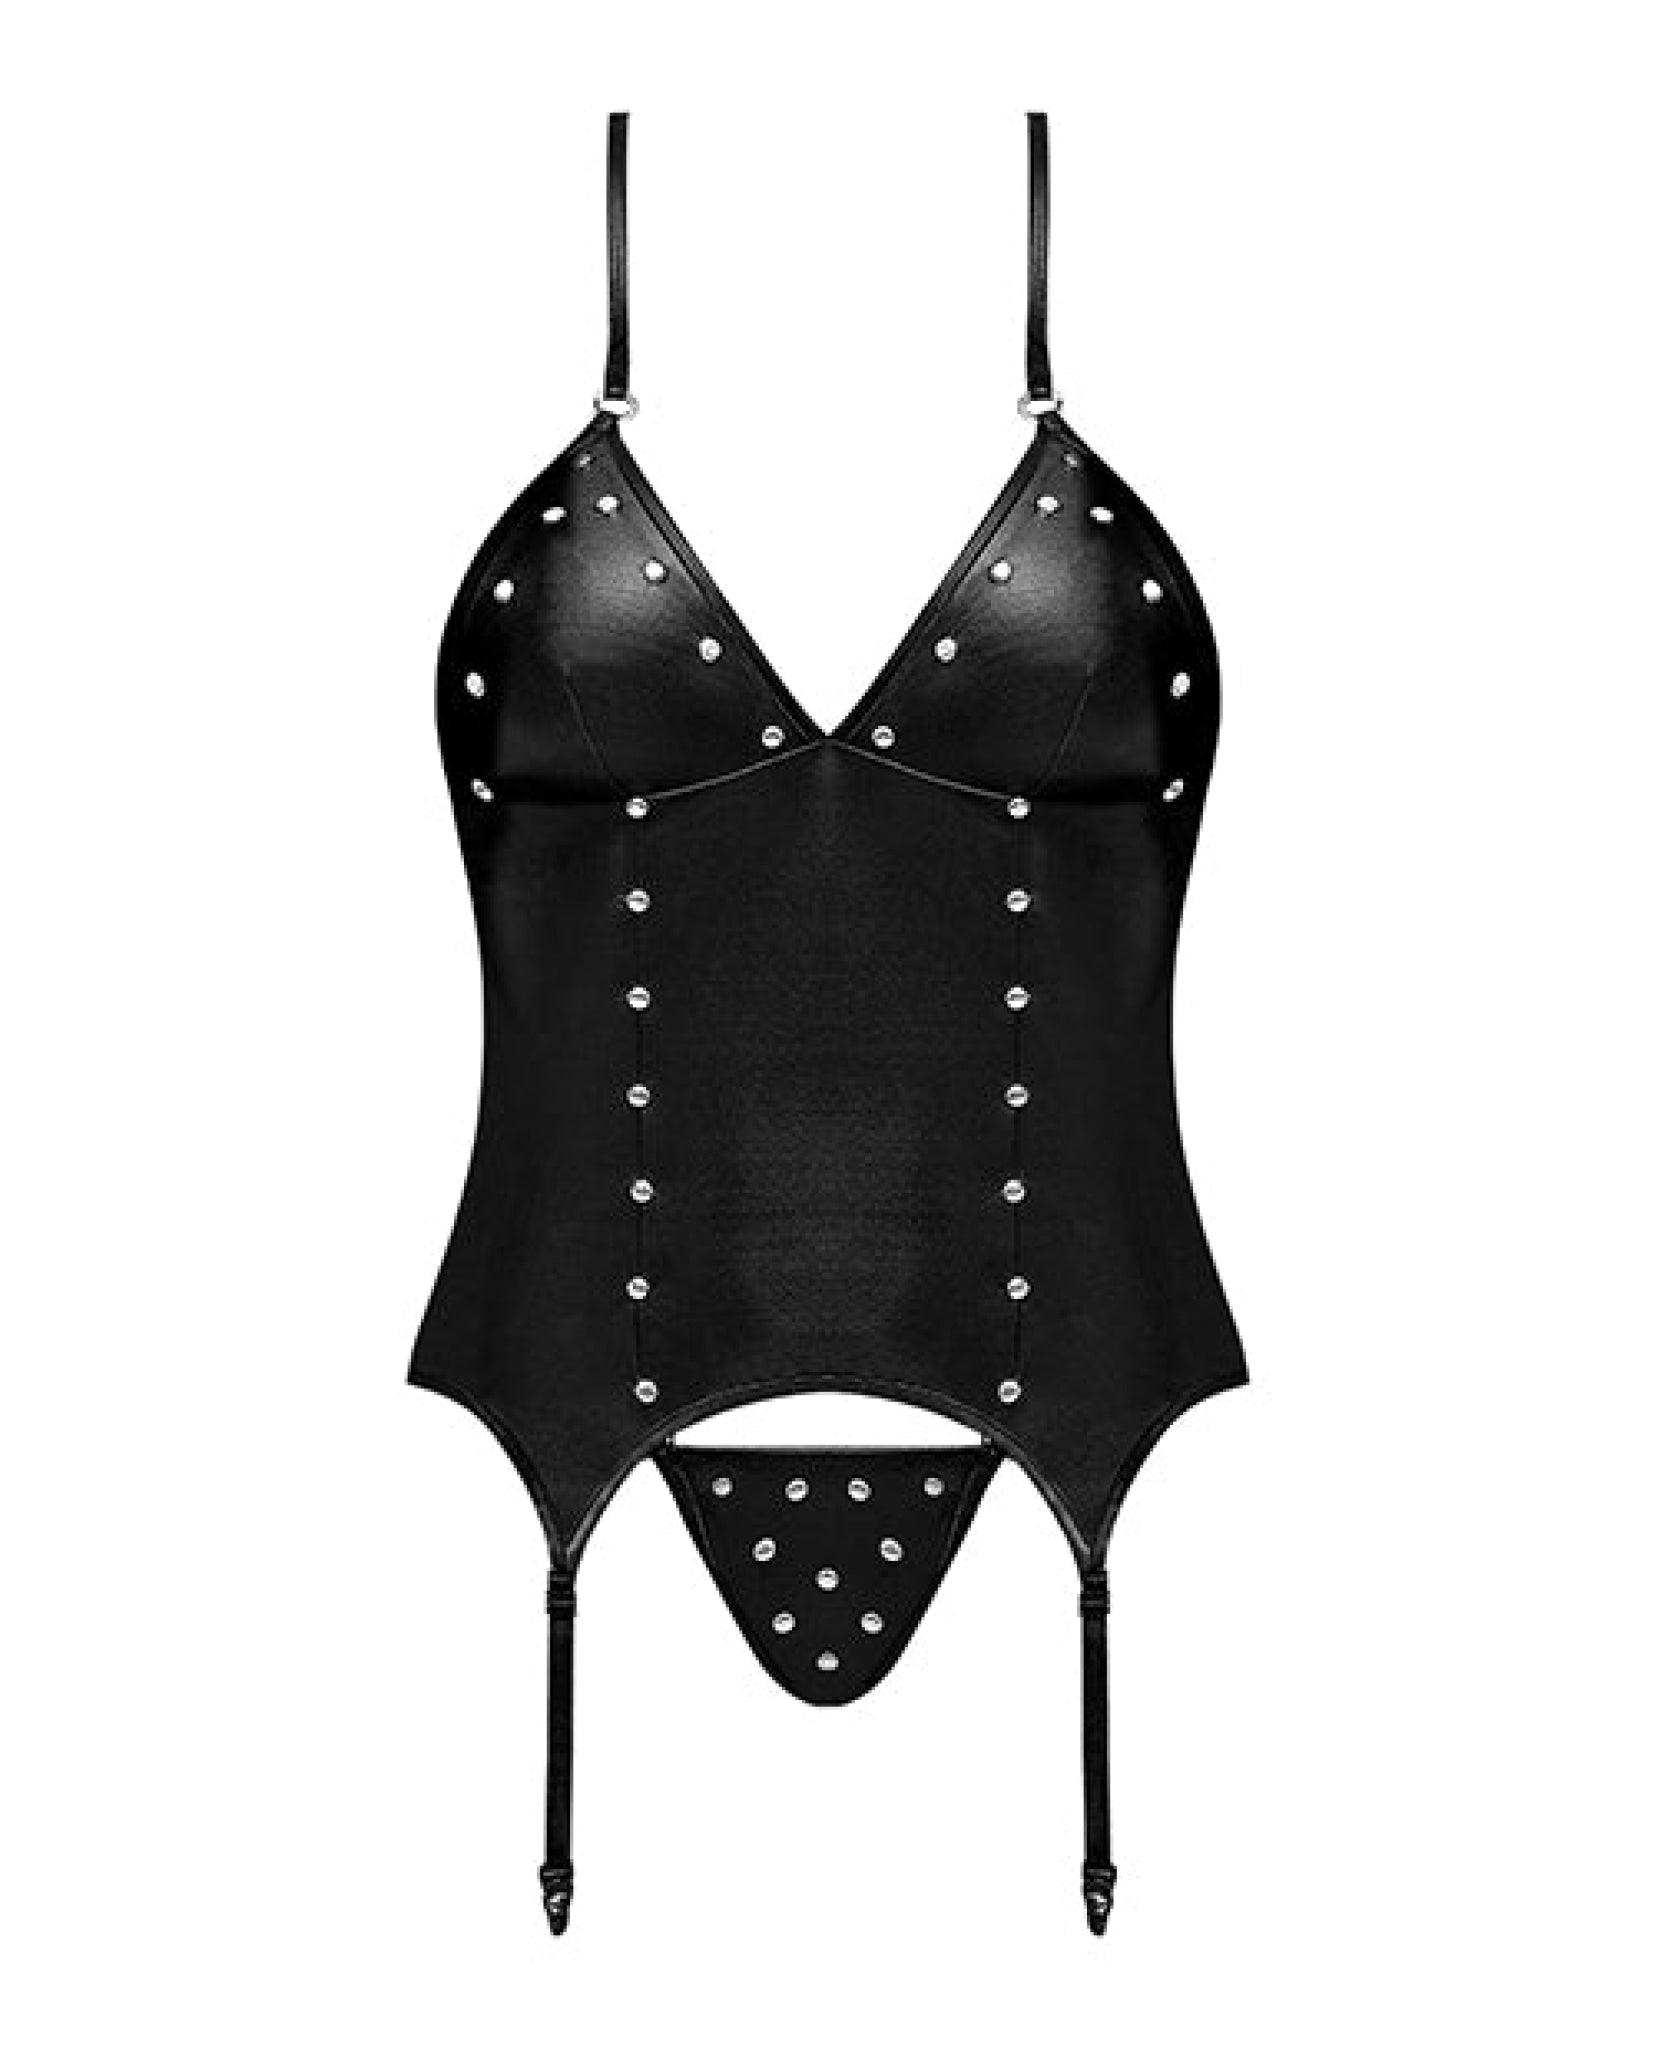 Lust Madame Corset W/metal Garters & G-string Black Comme Ci Comme Ca